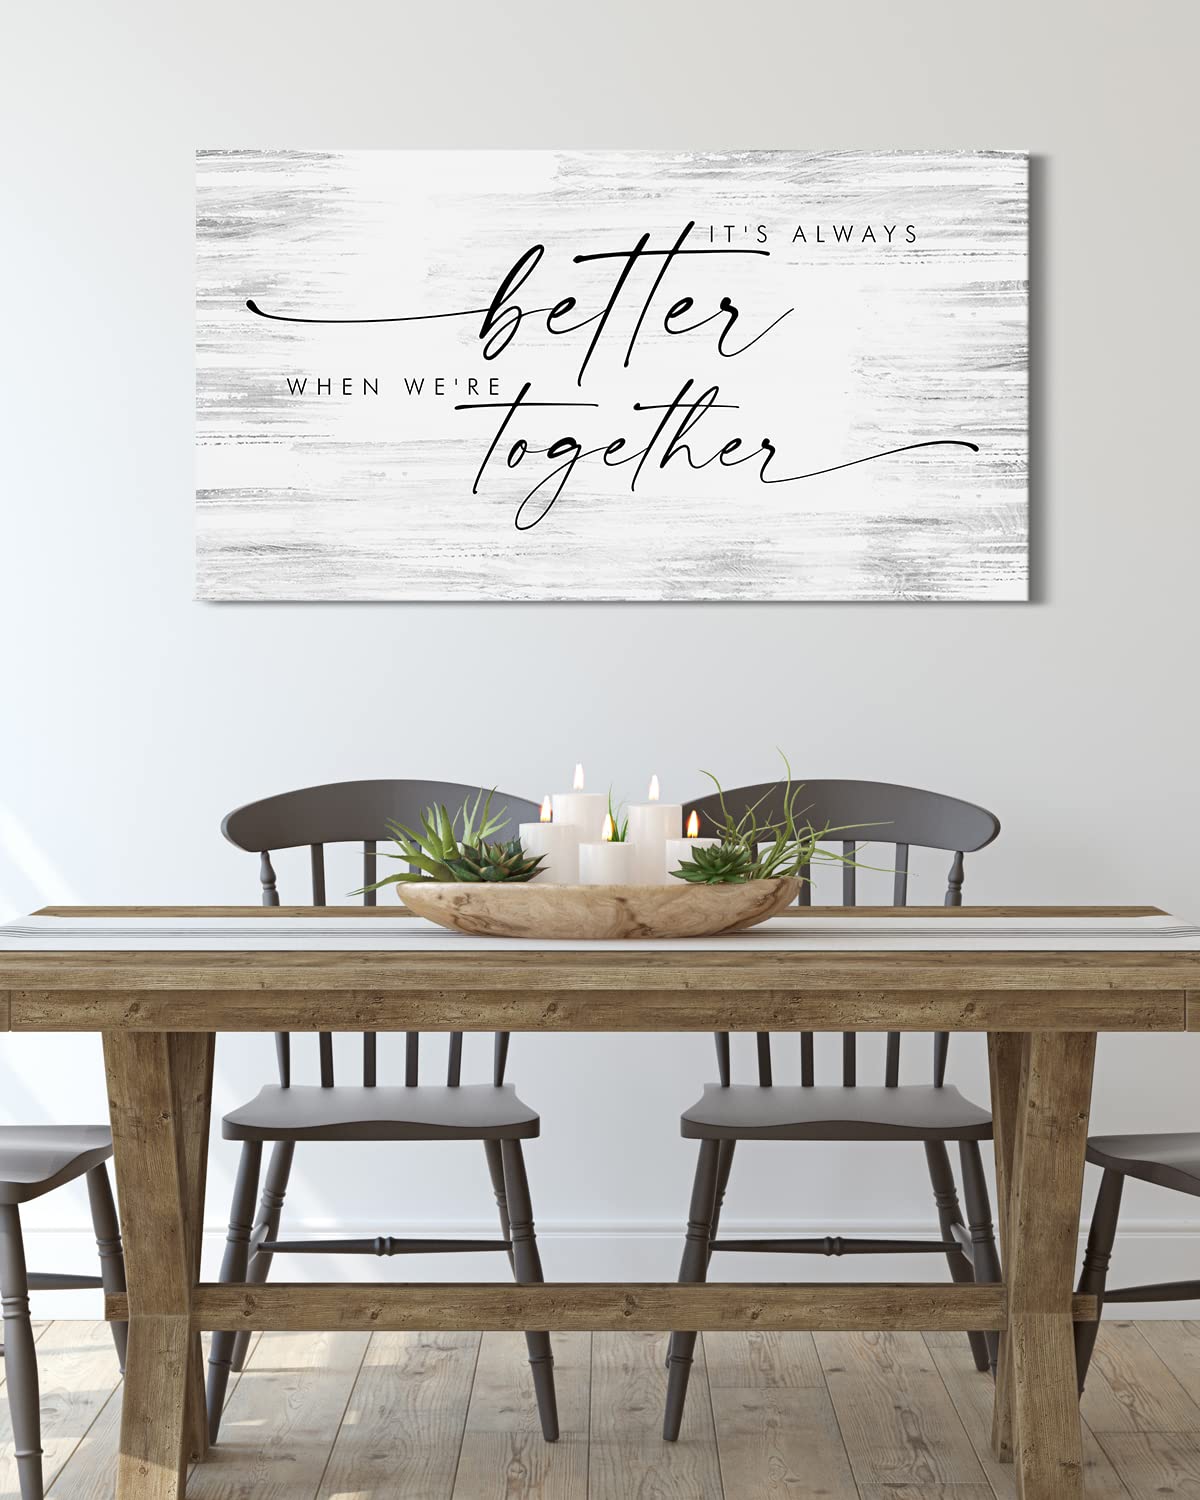 Above Bed Wall Decor for Bedroom - It's Always Better When We're Together Master Bedroom Wall Art - Minimalist Farmhouse Decor - Wedding Gift for Couple - Bridal Shower